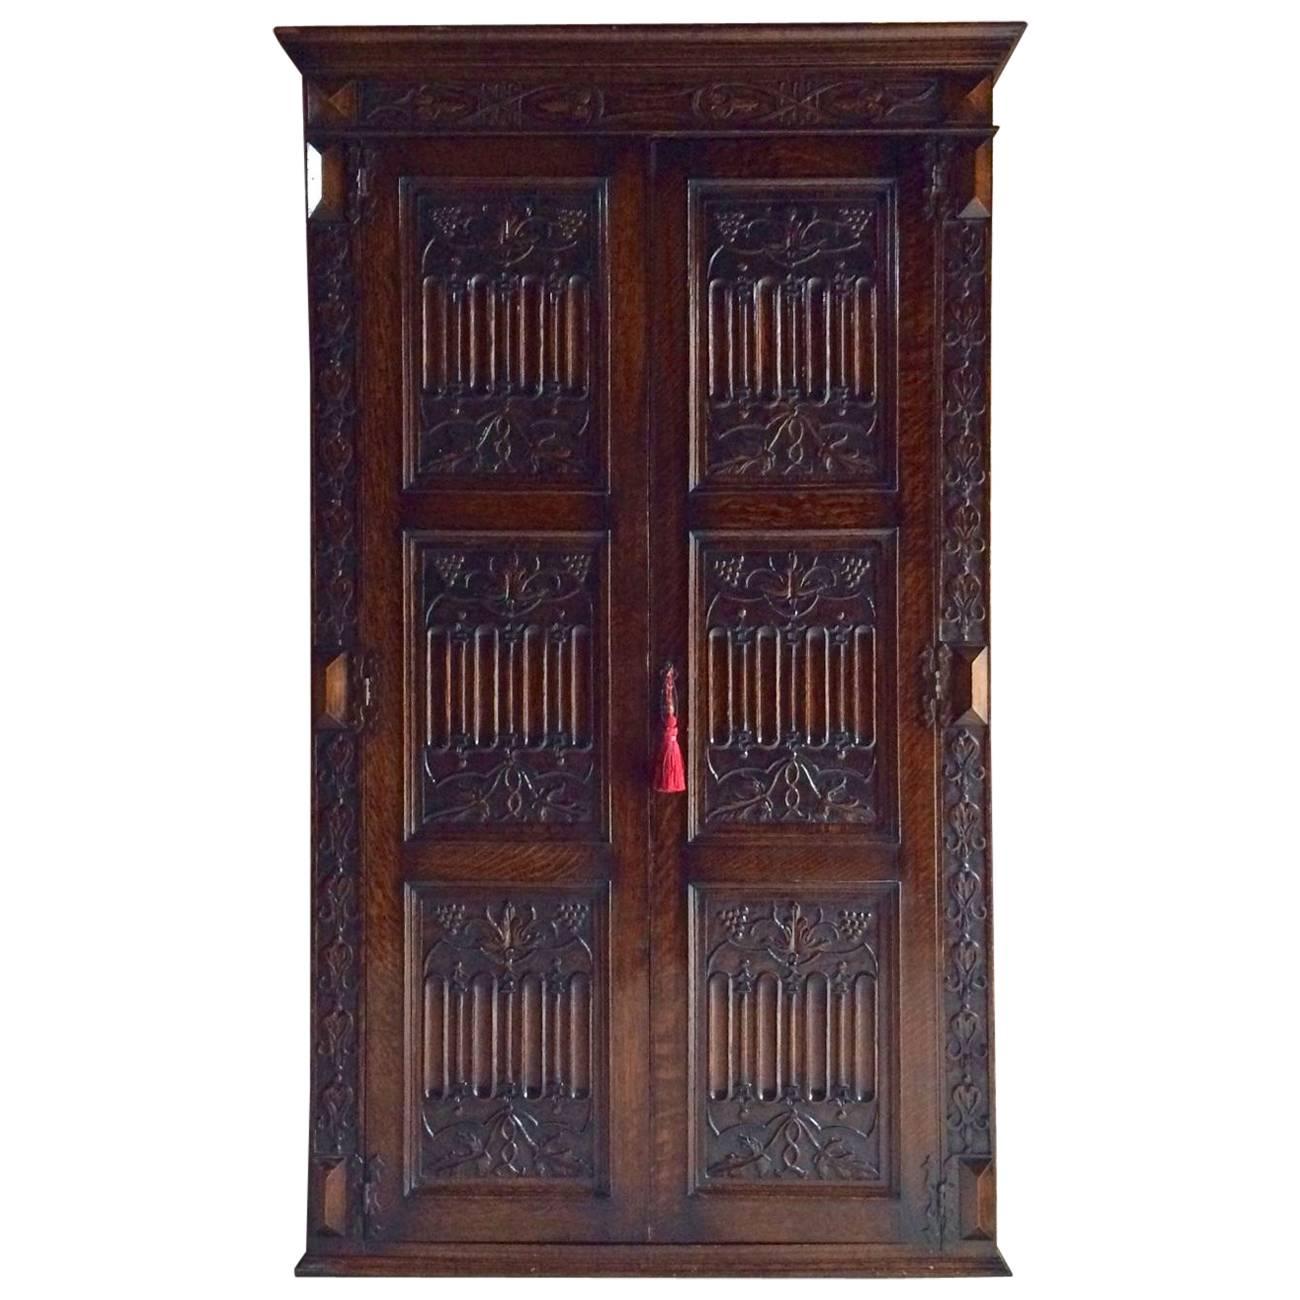 Antique Wardrobe Armoire Solid Oak Gothic Heavily Carved Edwardian